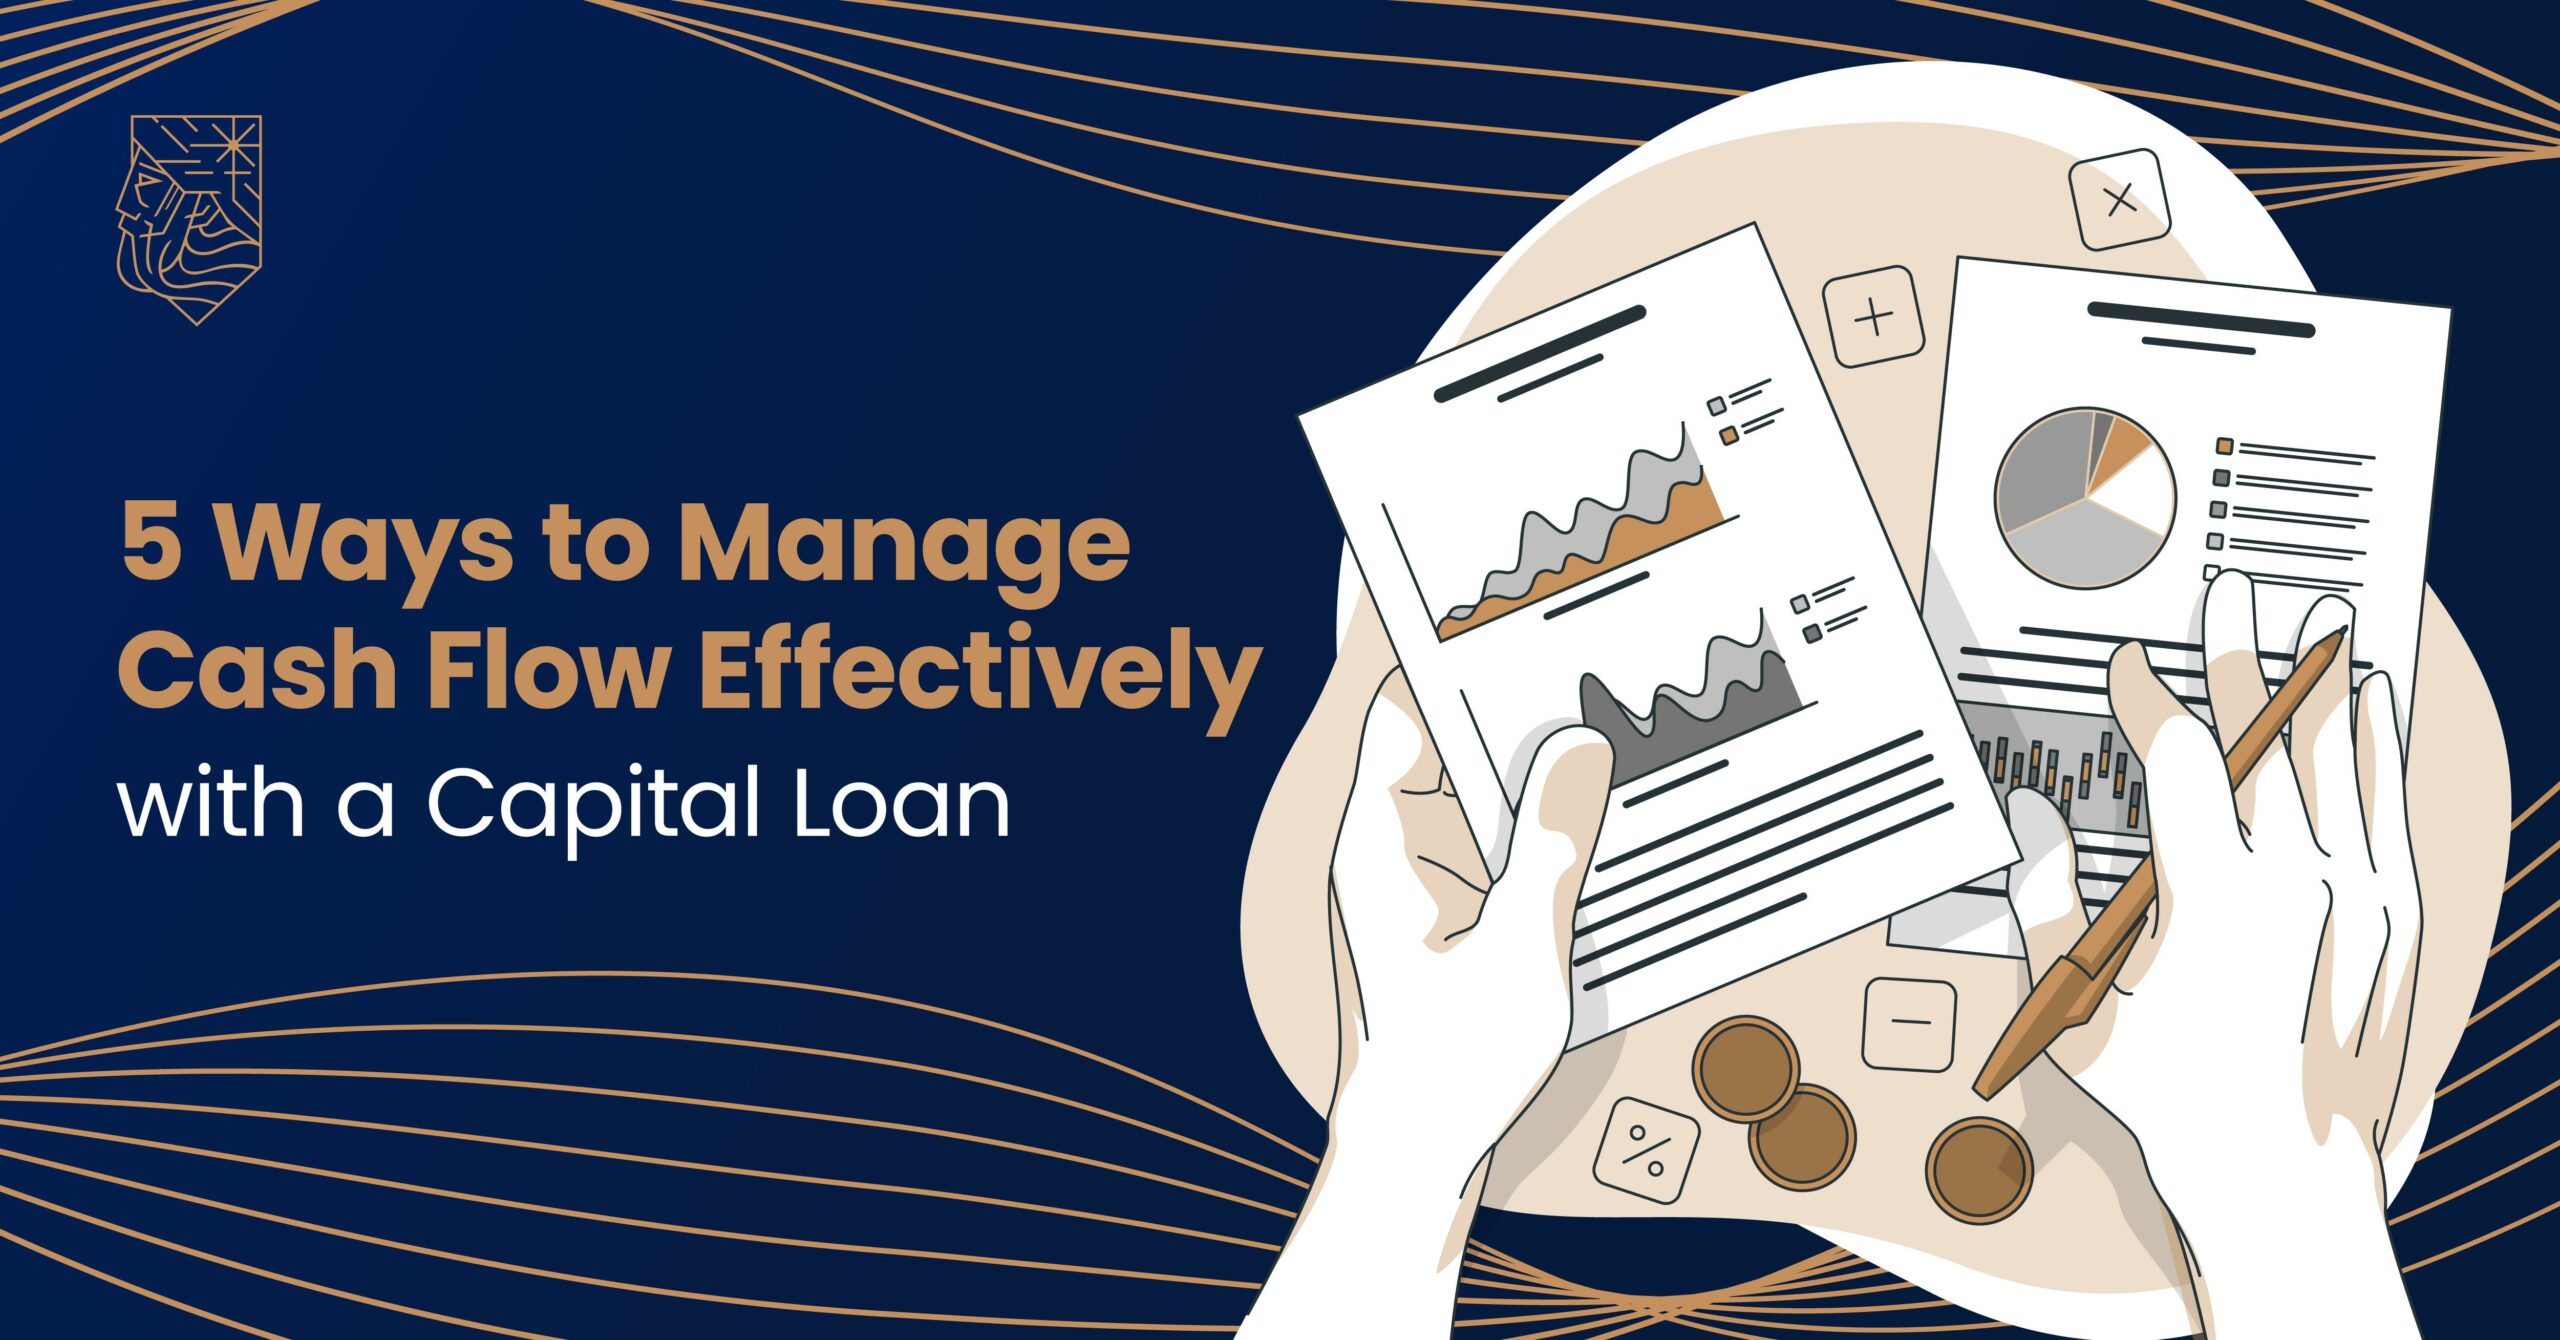 Zenith Capital - Ways to Manage Cash Flow Effectively with a Capital Loan